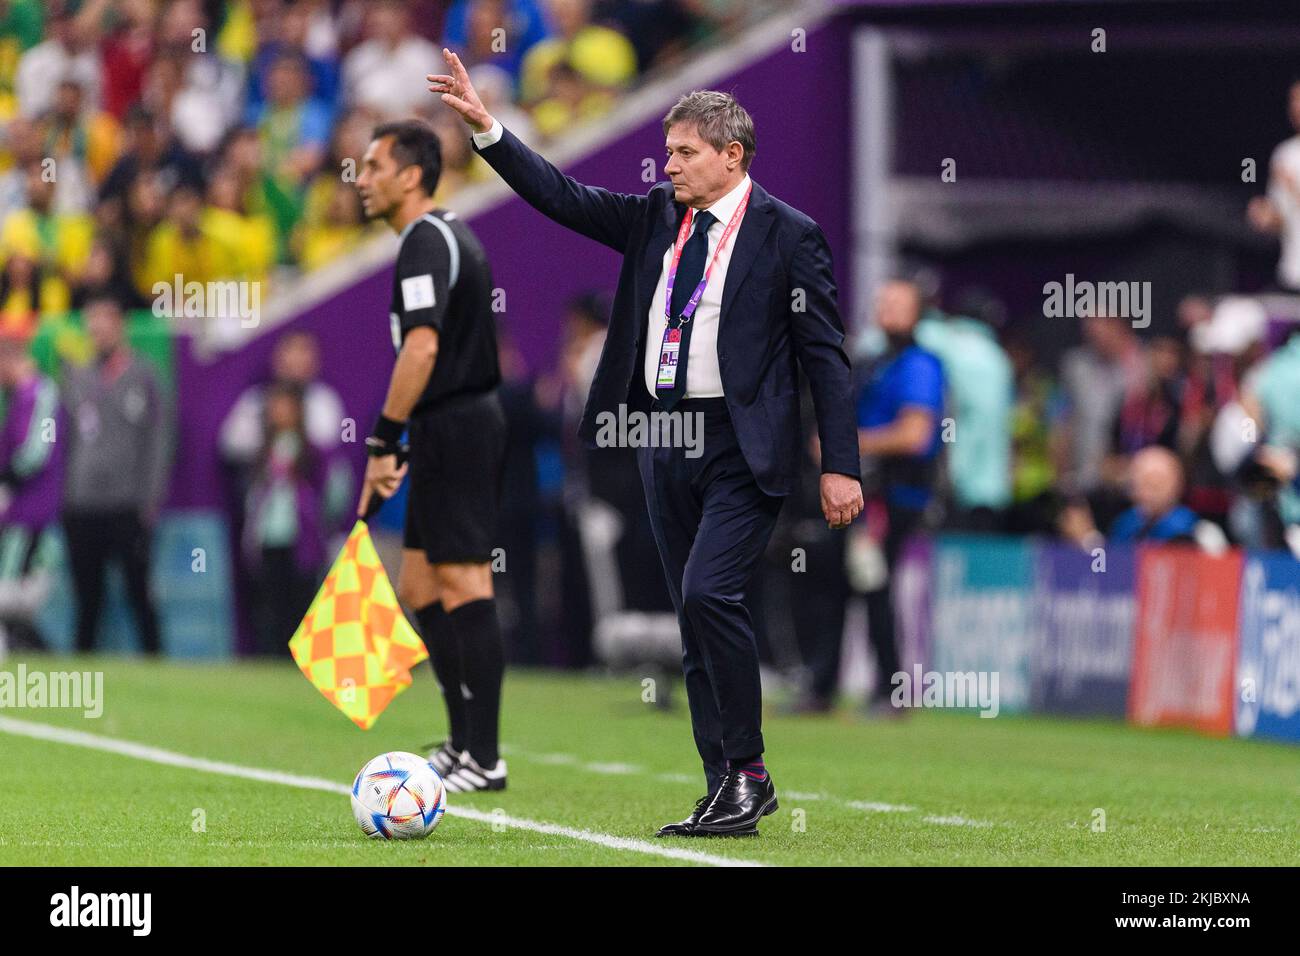 Lusail, Qatar. 24th Nov, 2022. Lusail, Qatar, Nov 25th 2022: Head coach of Serbia, Dragan Stojkovic during a match between Brazil vs Serbia, valid for the group stage of the World Cup, held at the Lusail National Stadium in Lusail, Qatar. (Marcio Machado/SPP) Credit: SPP Sport Press Photo. /Alamy Live News Stock Photo